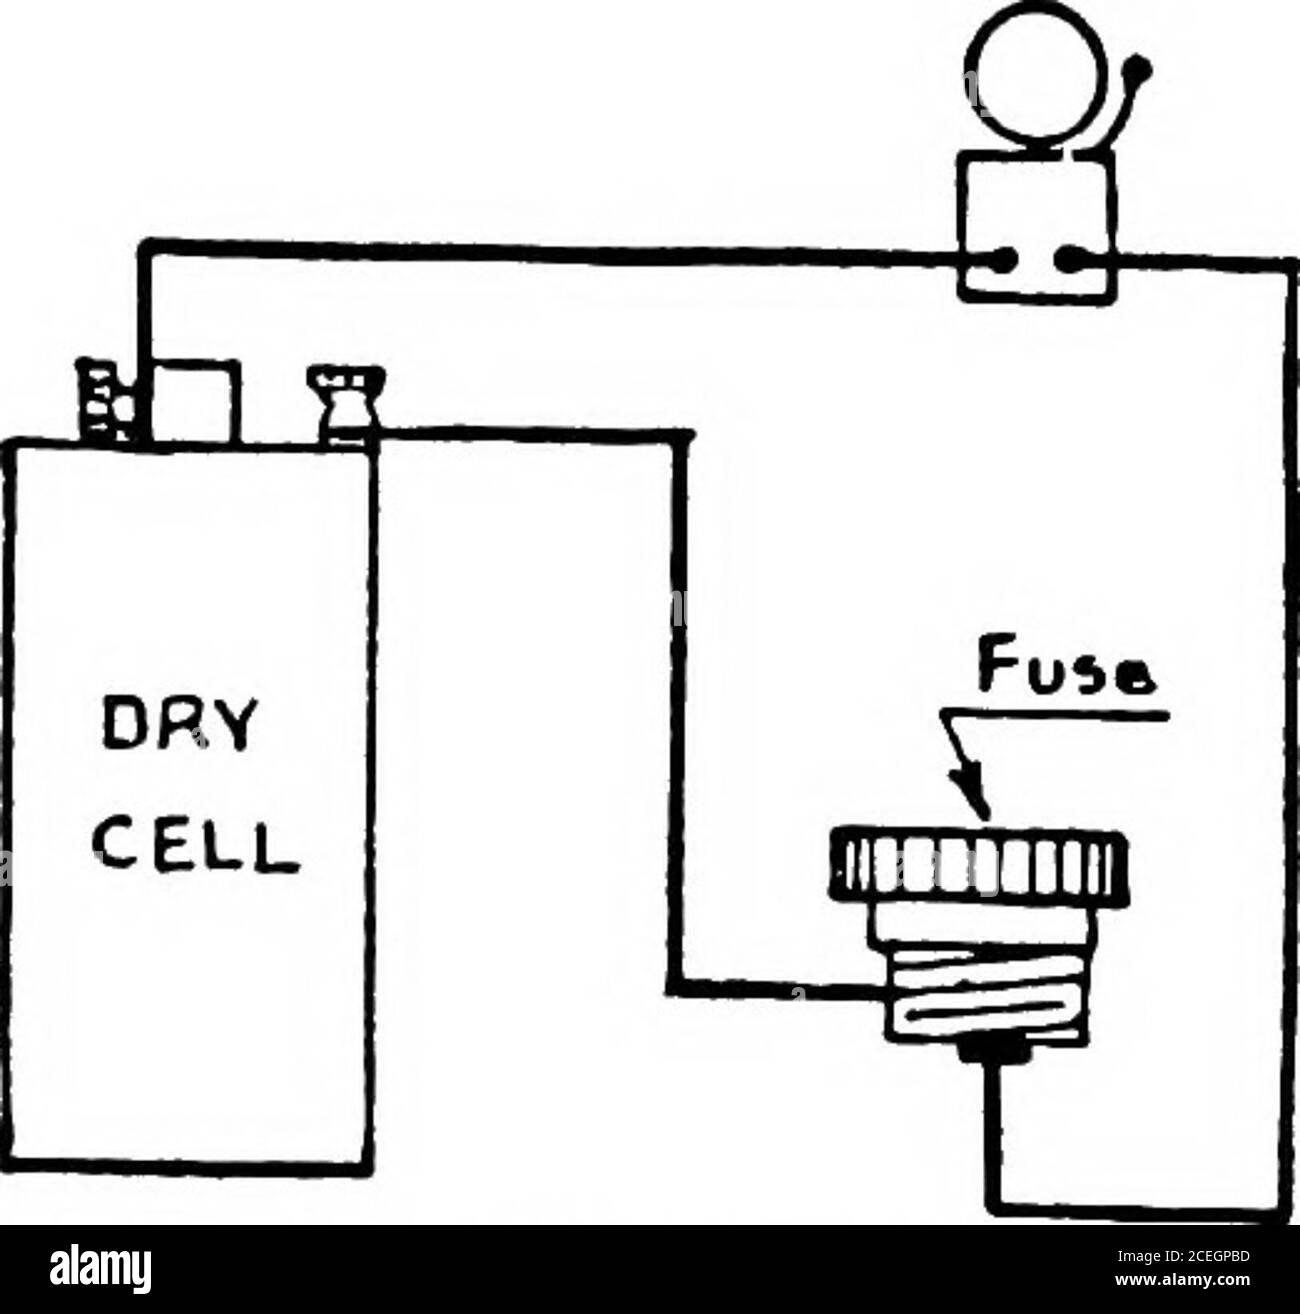 . Practical electricity for beginners. Fig. 33fuse. Cartridge FUSES AND THEIR PURPOSES 55. Fig. 34. Showing a simplemethod of testing a fuse. it with a good one. This can be done in any of several ways. A bell and a dry cell may be used, as in Fig. 34, in which case one wire is connected to the bell and the dry cell, and another to the bell only. This wire is then held in contact with the side of the fuse plug and the bottom of the plug is held in contact with the terminal of the dry cell, or connected as shown. If the bell rings, the fuse is good, but if it doesnt, the fuse has been blown. An Stock Photo